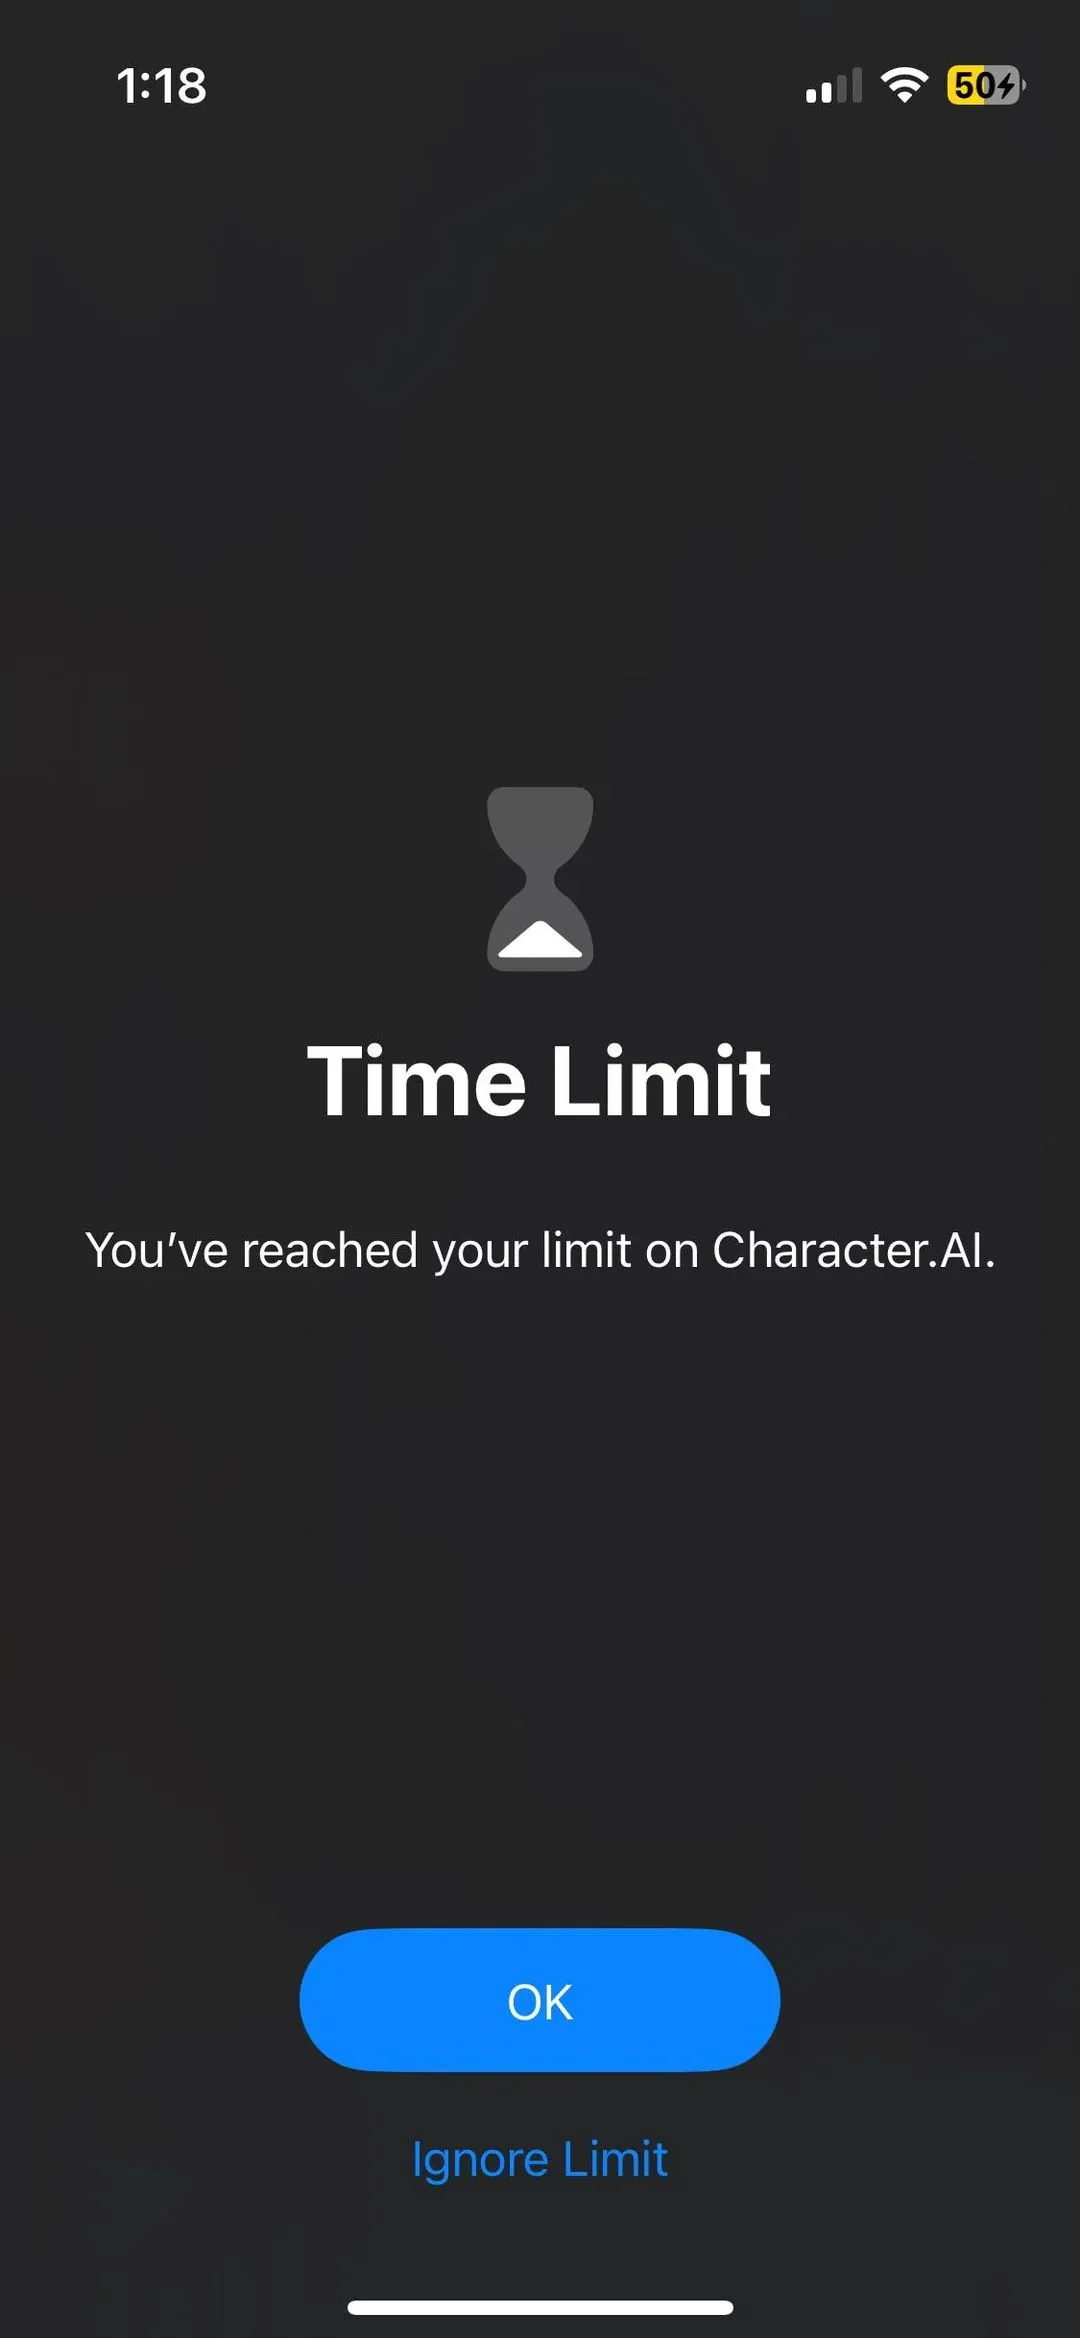 Time Limit - You've reached your limit on Character.AI